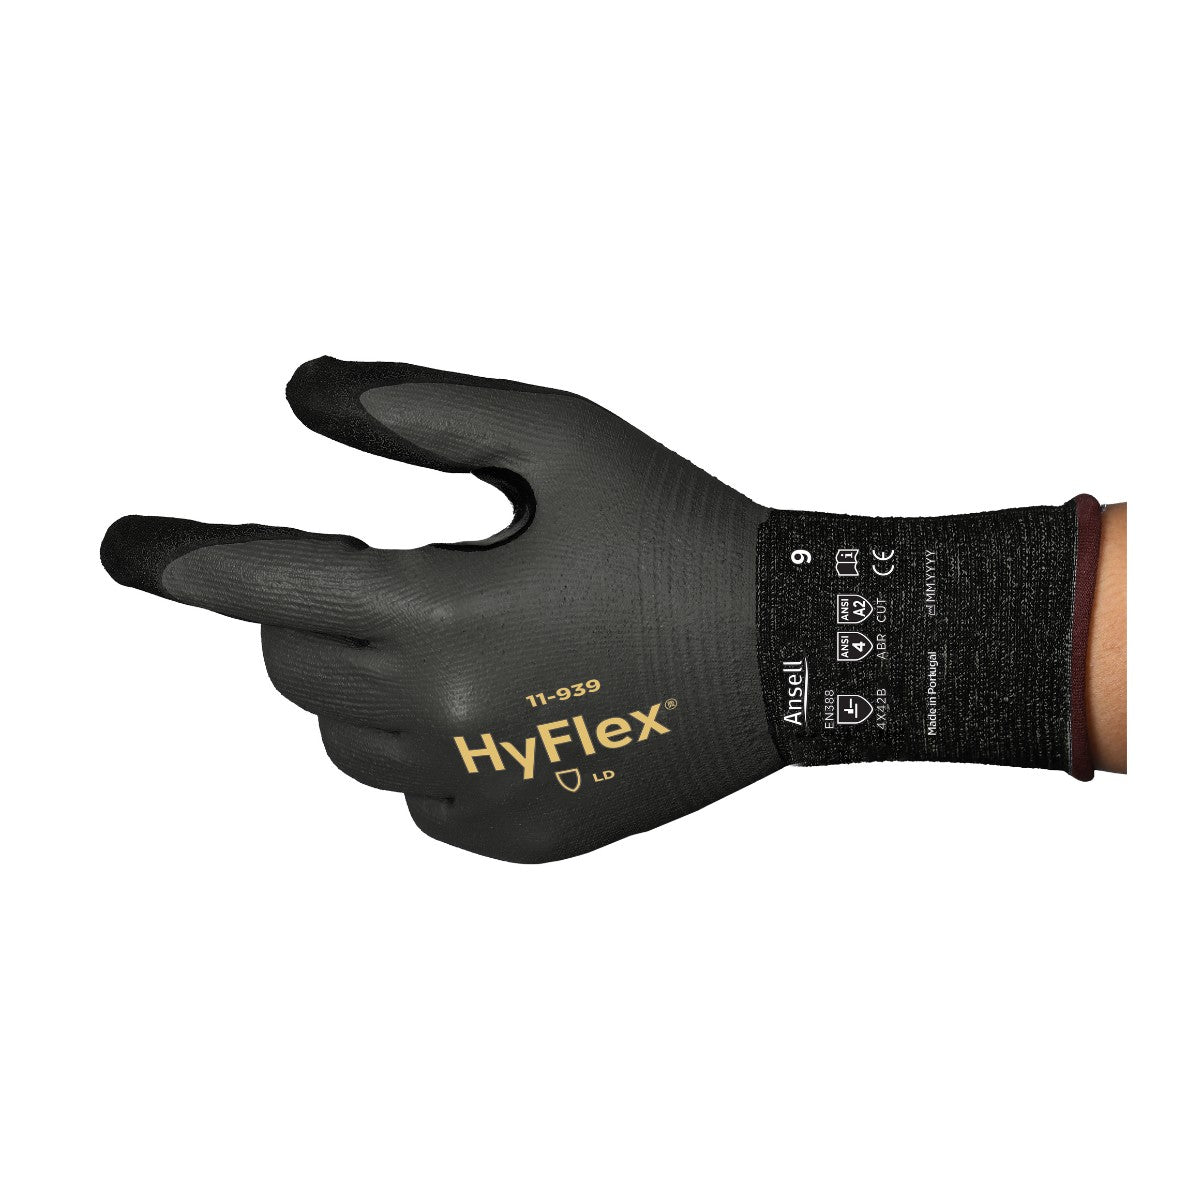 Ansell HyFlex® 11-939 (Pack of 12)